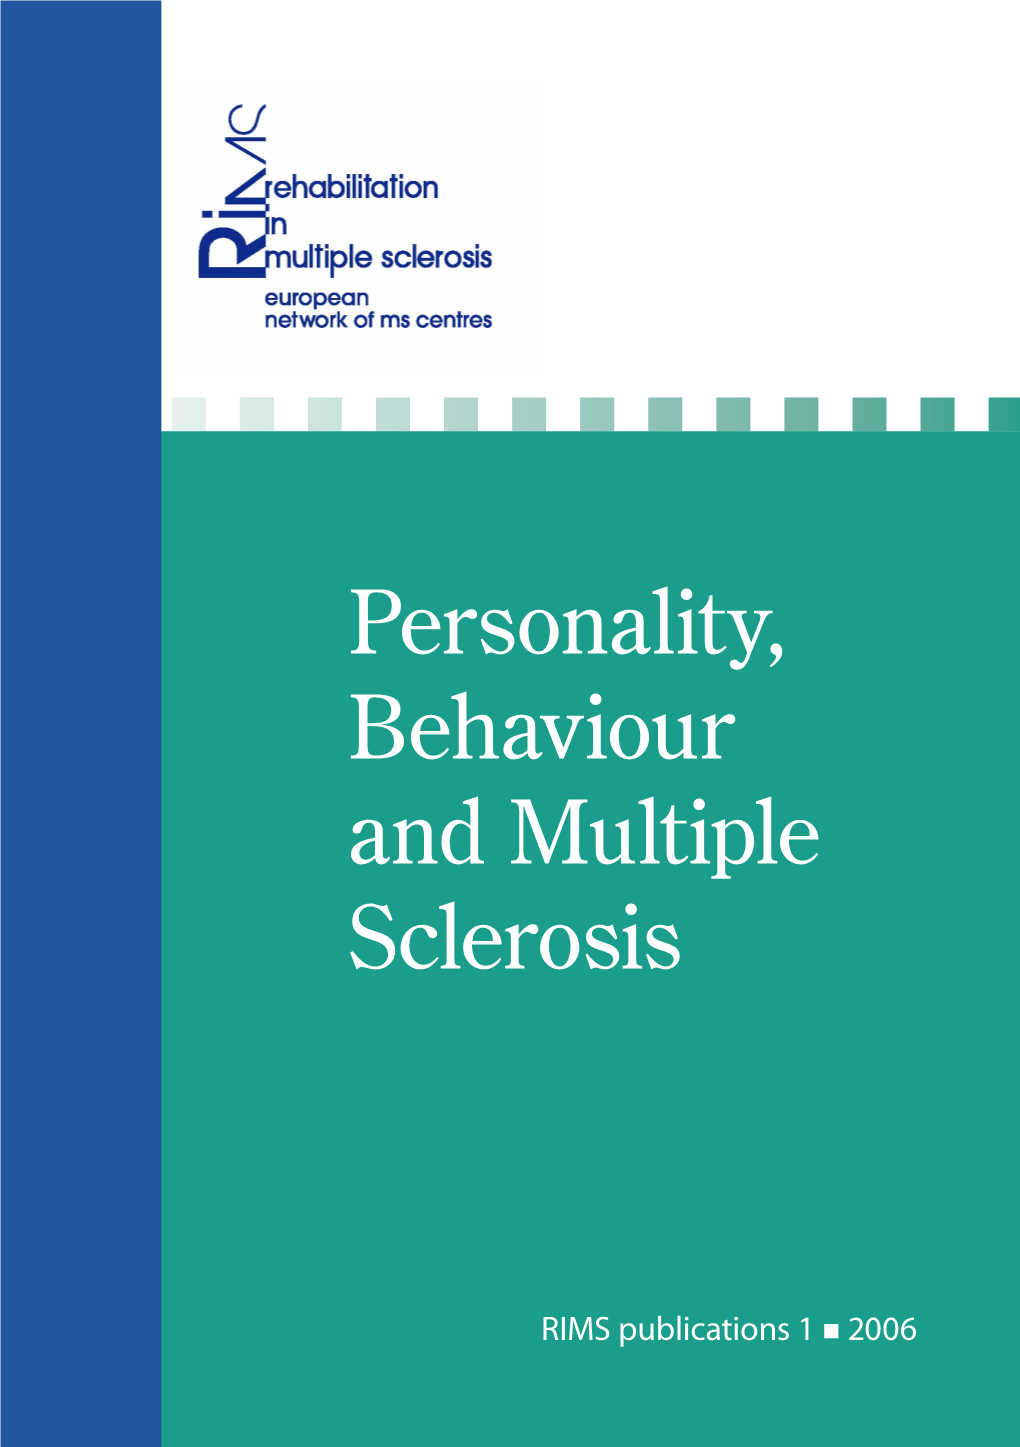 Personality, Behaviour and Multiple Sclerosis